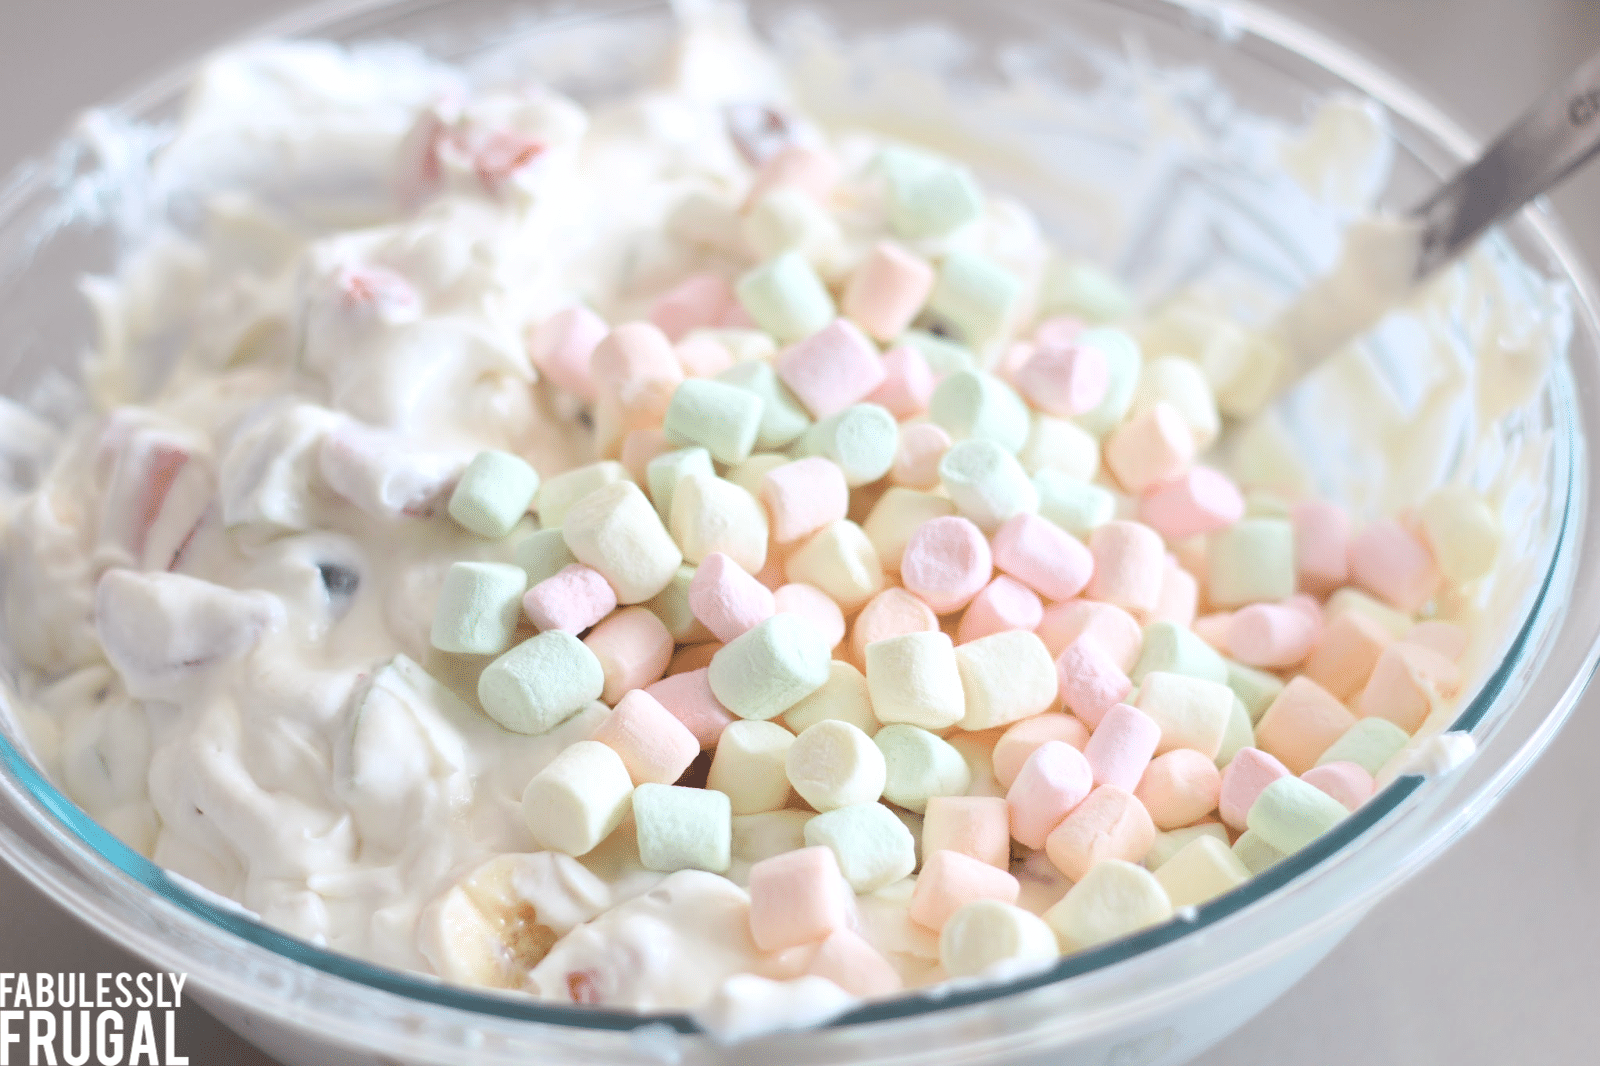 Mixing marshmallows in with fruit salad